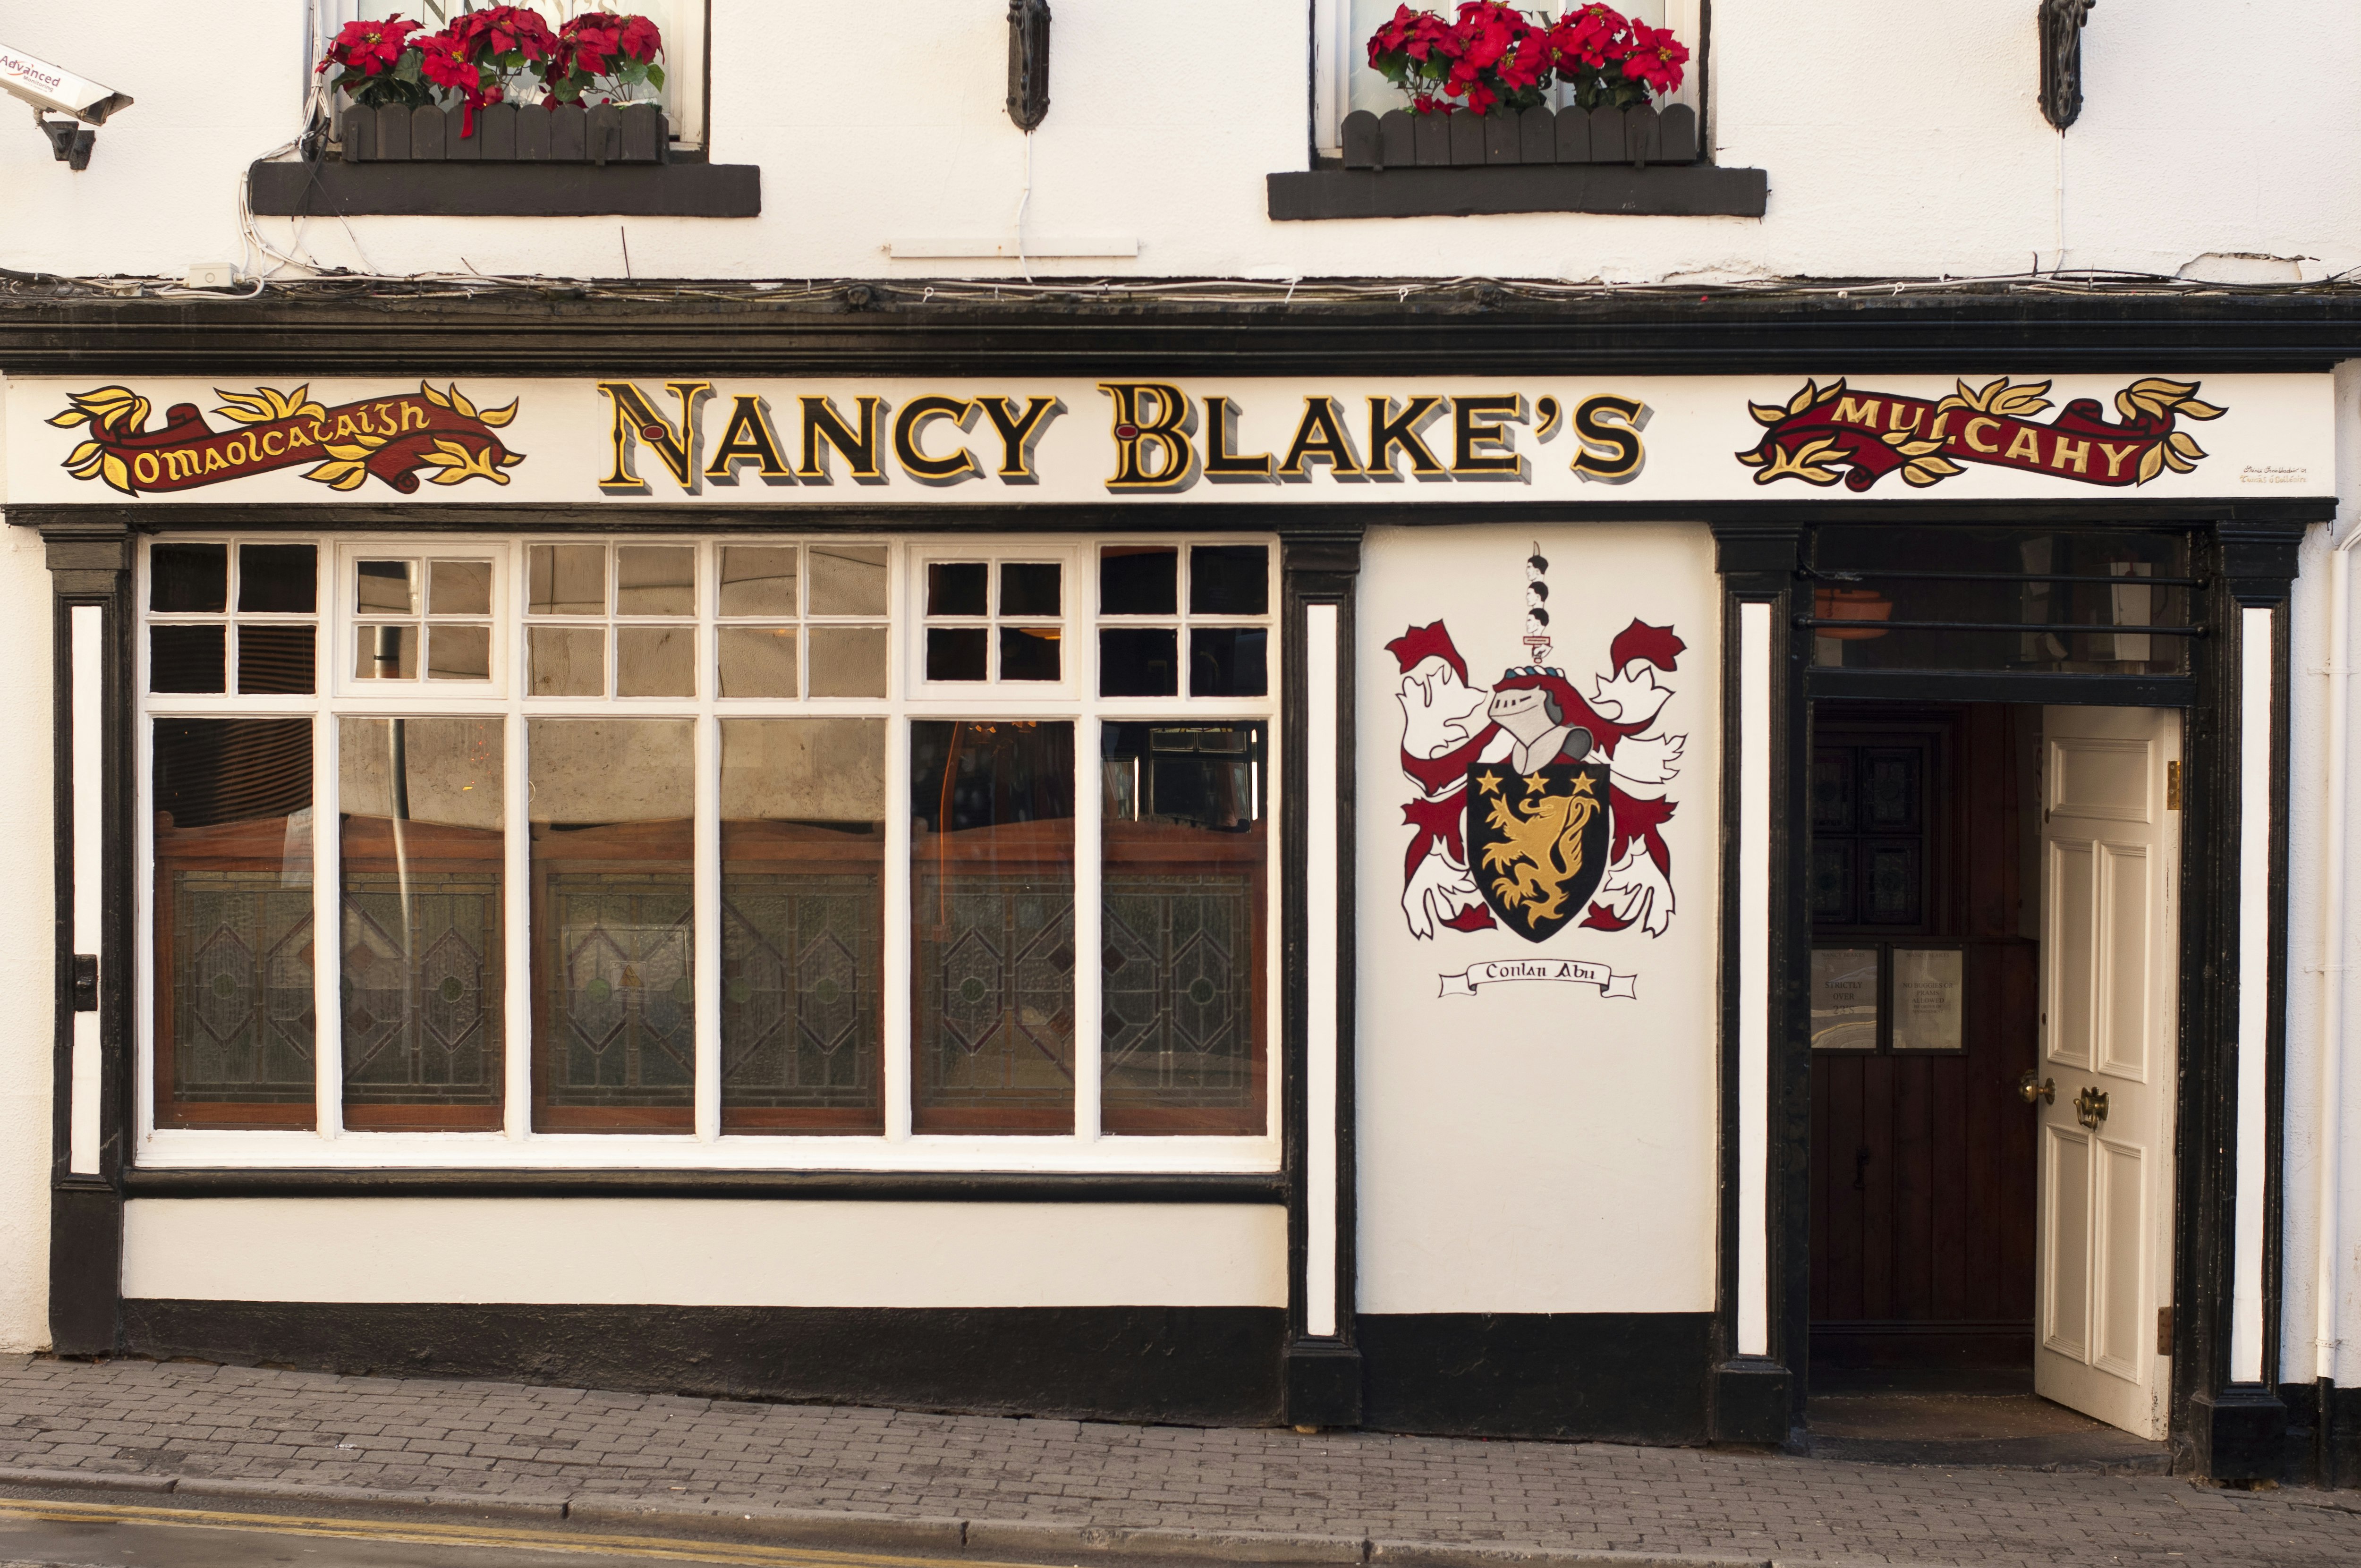 The white plaster and dark wood Tudor exterior of Nancy Blake's pub on Denmark Street in Limerick is decorated with a heraldic crest, two mottos in Gaeilge, and window boxes full of bright red flowers